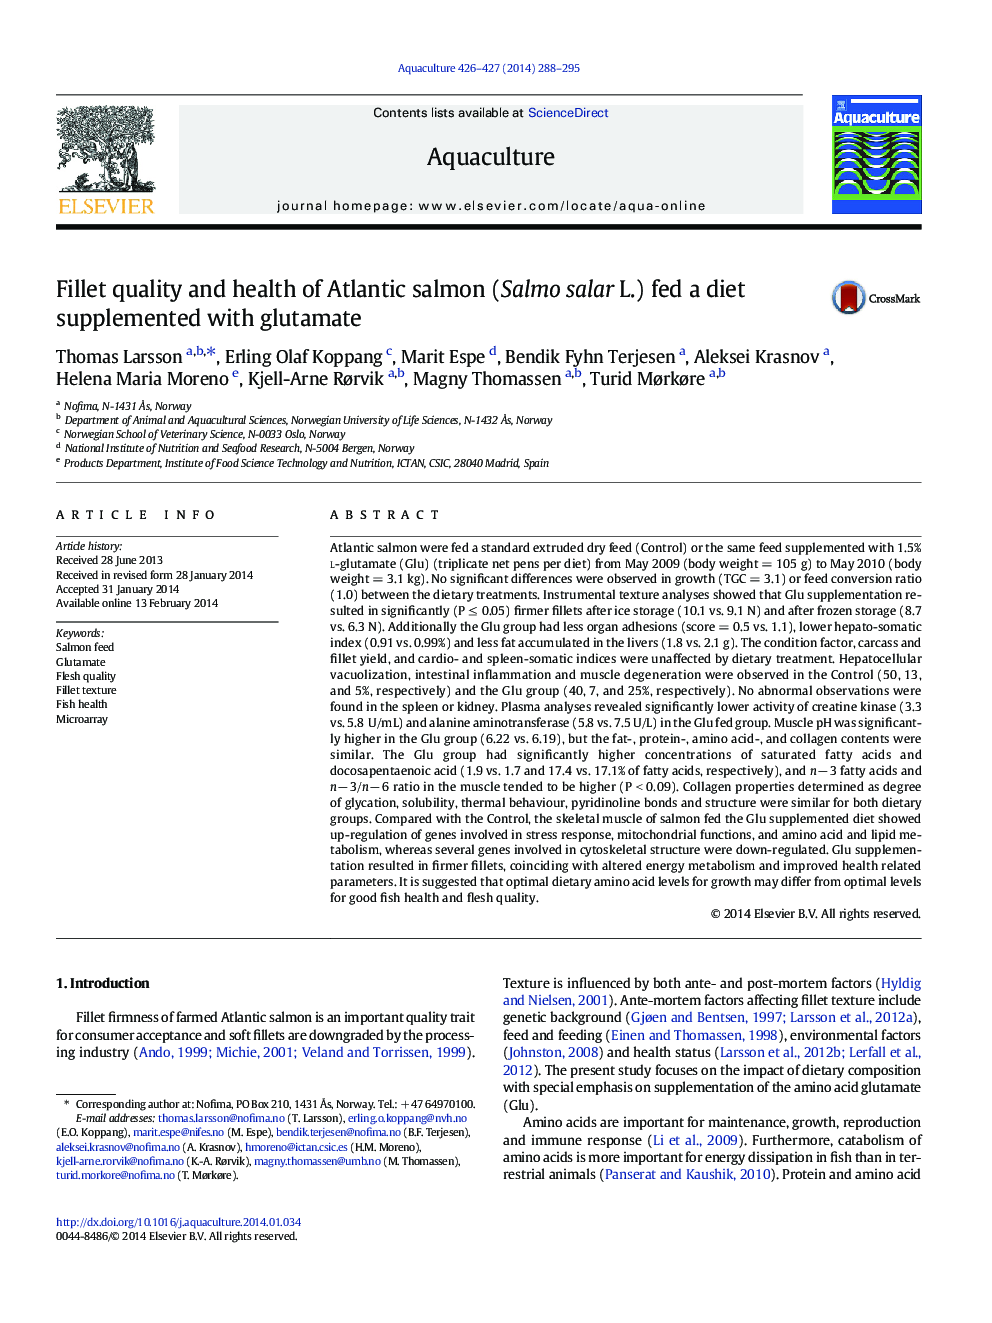 Fillet quality and health of Atlantic salmon (Salmo salar L.) fed a diet supplemented with glutamate